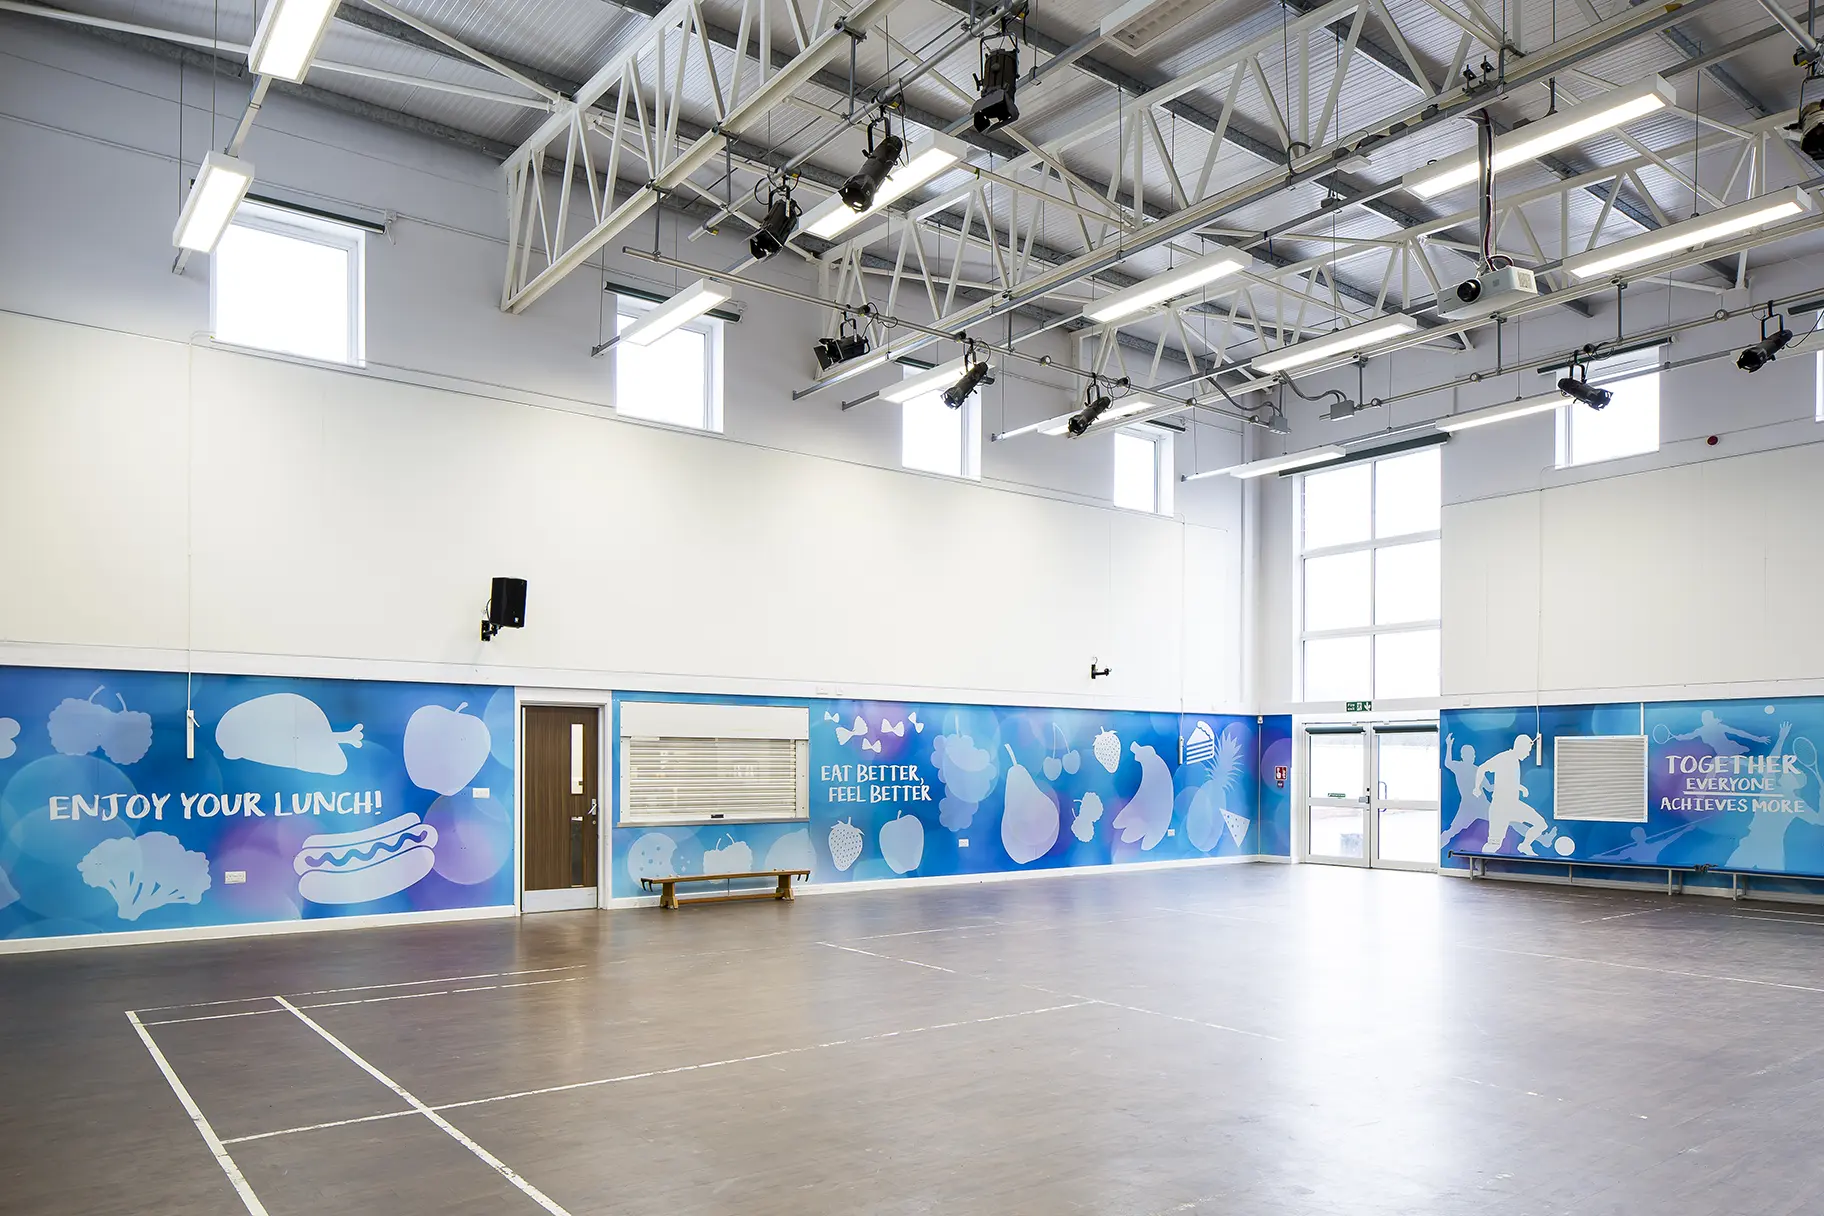 The Colleton sports hall motivational wall wrap wall art